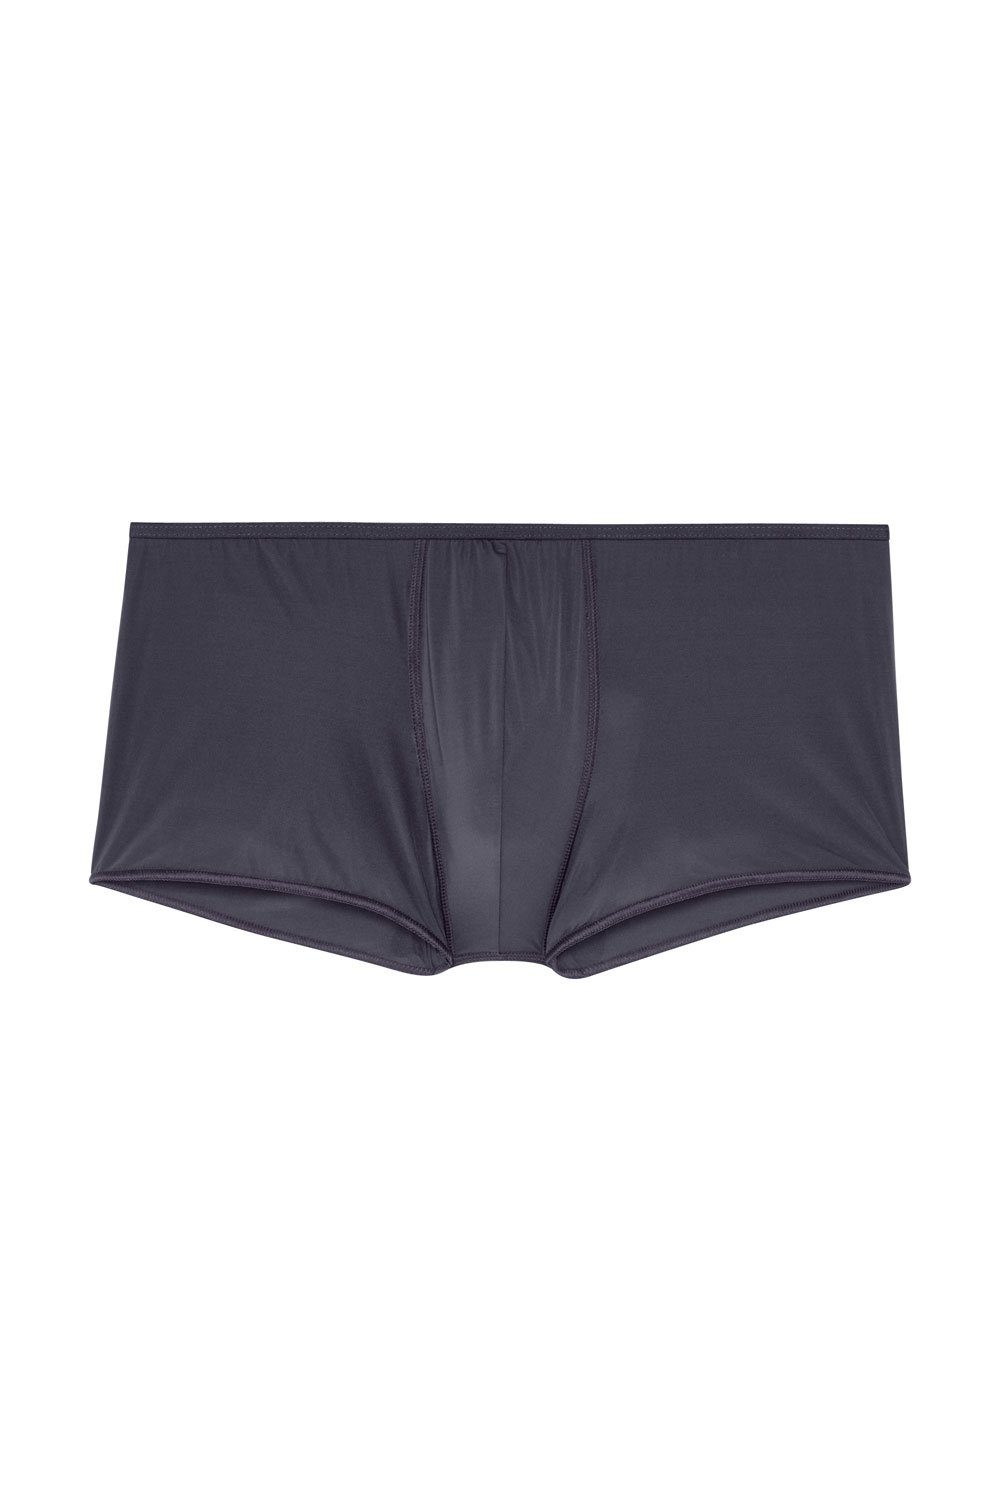 Hom Hipster Trunk 404755 anthracite | Hipster-Panties